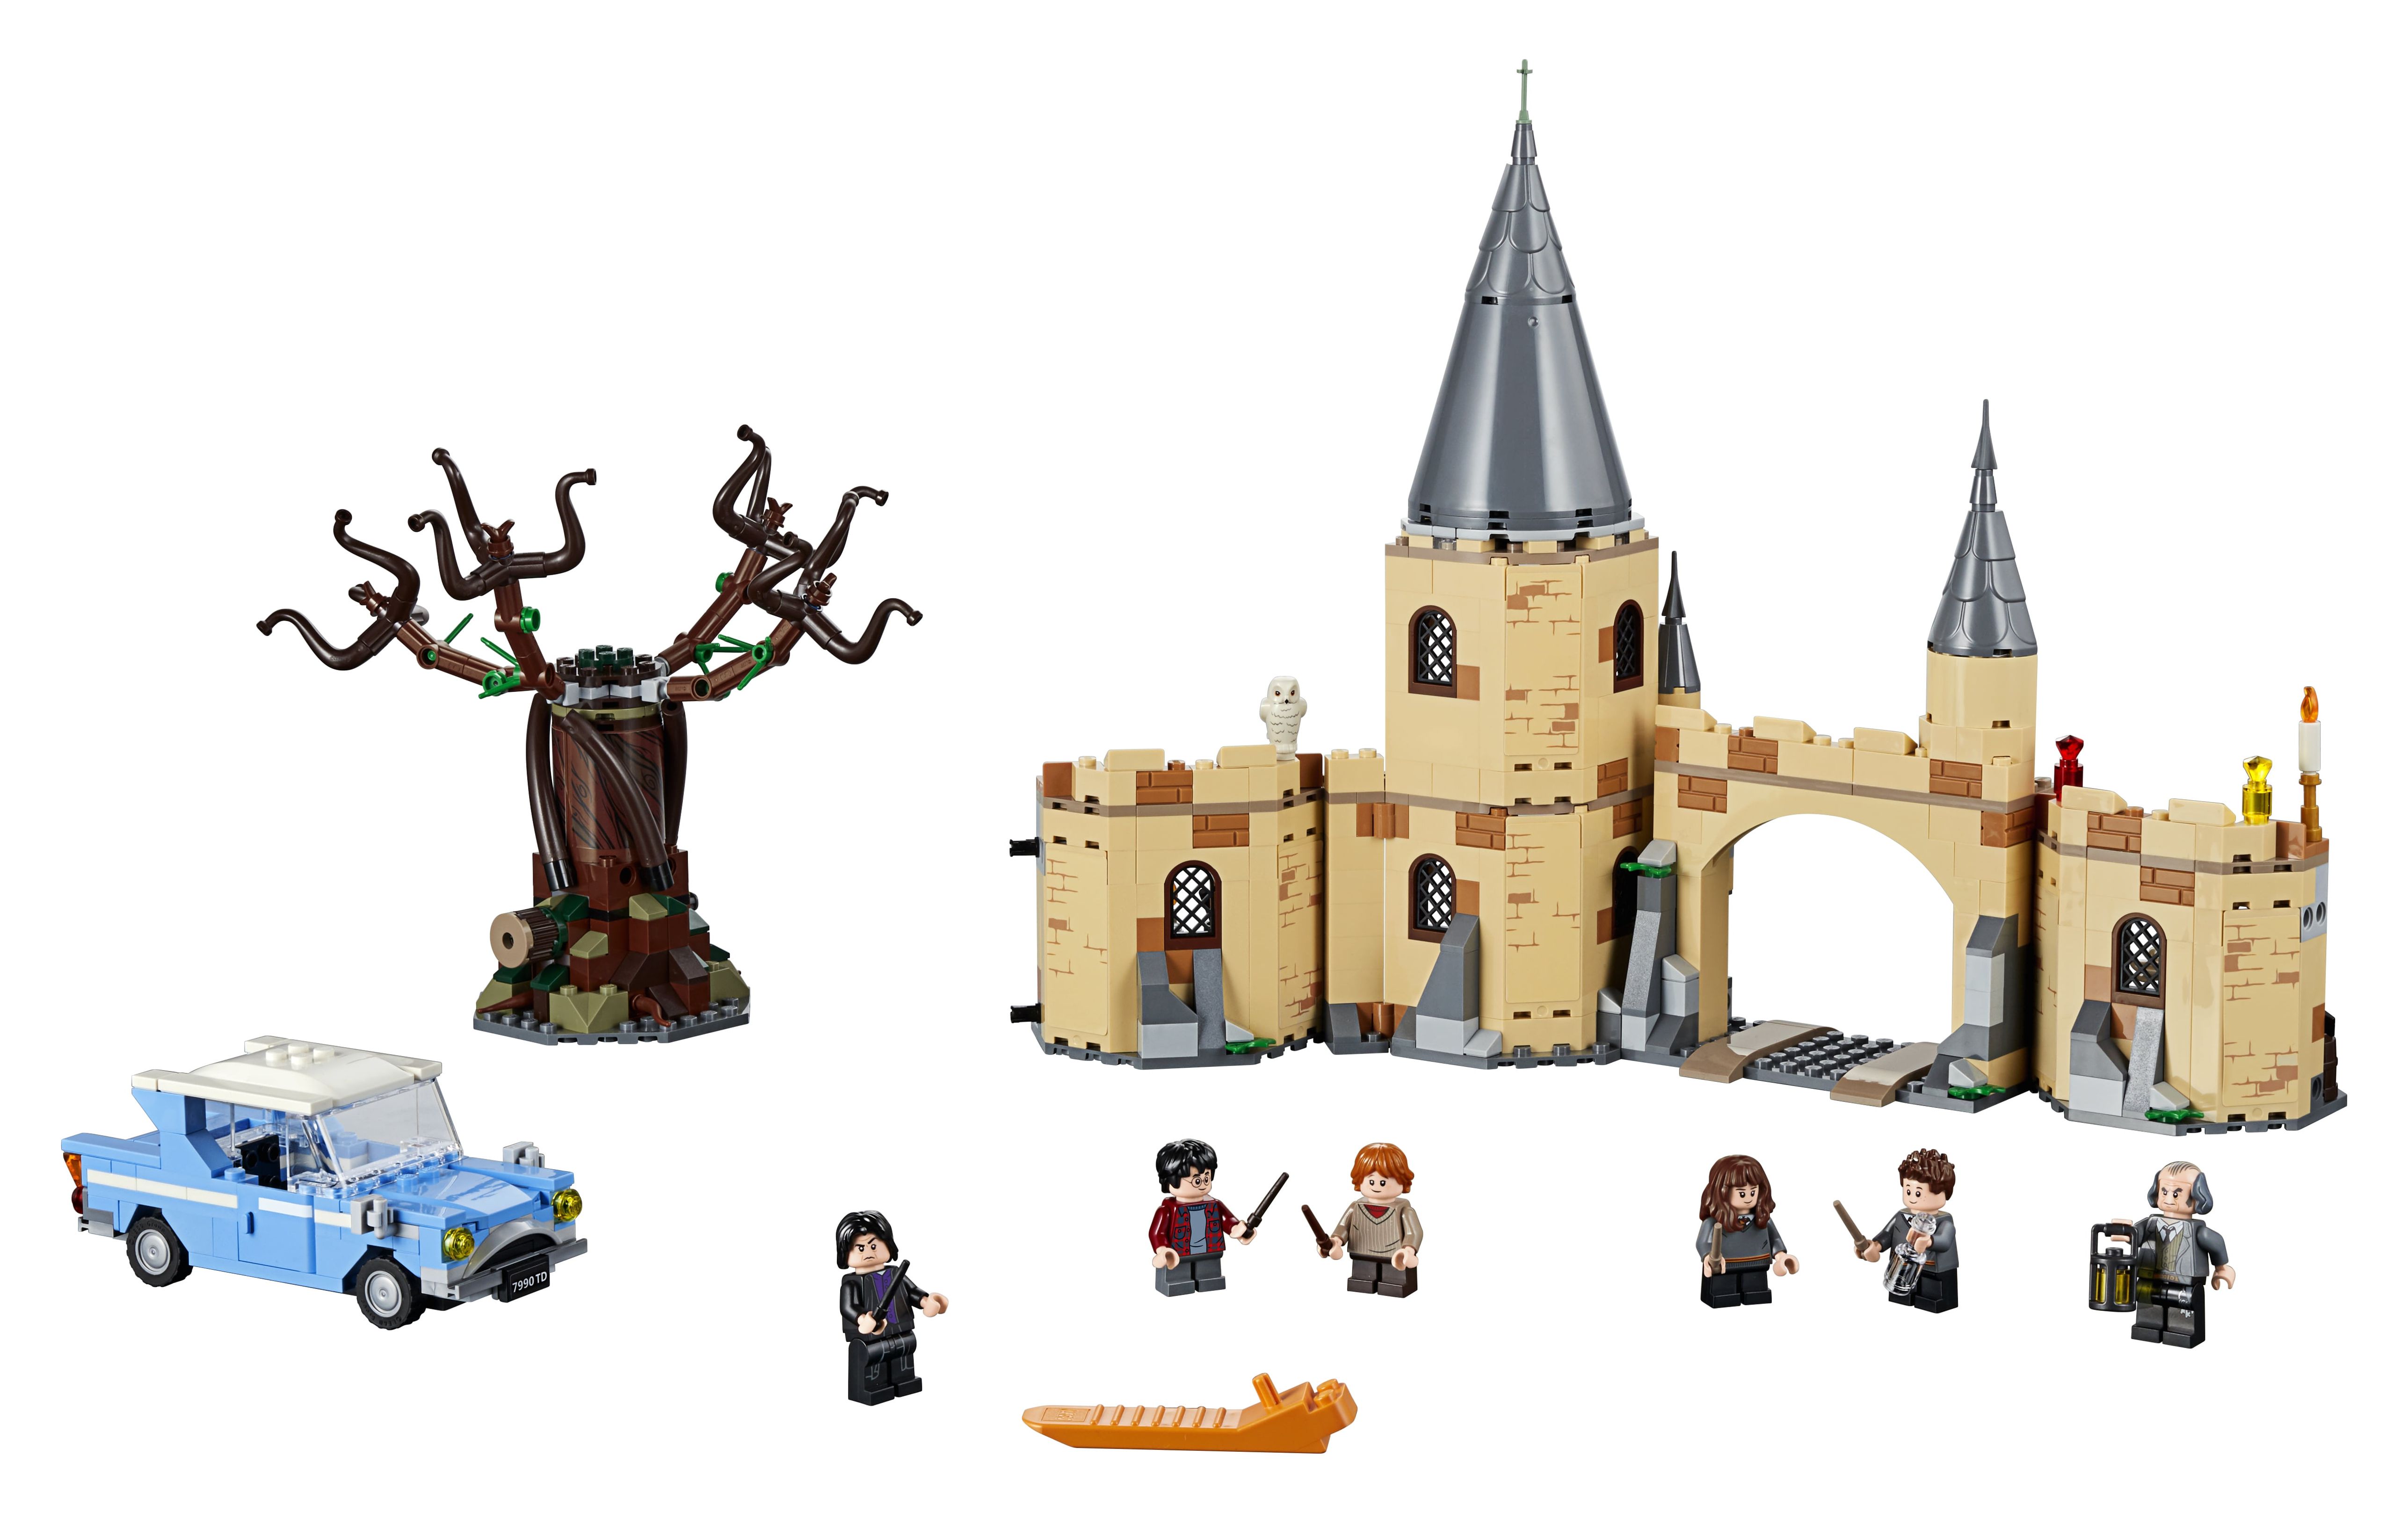 LEGO Harry Potter Hogwarts Whomping Willow 75953 (753 Pieces) - image 3 of 8